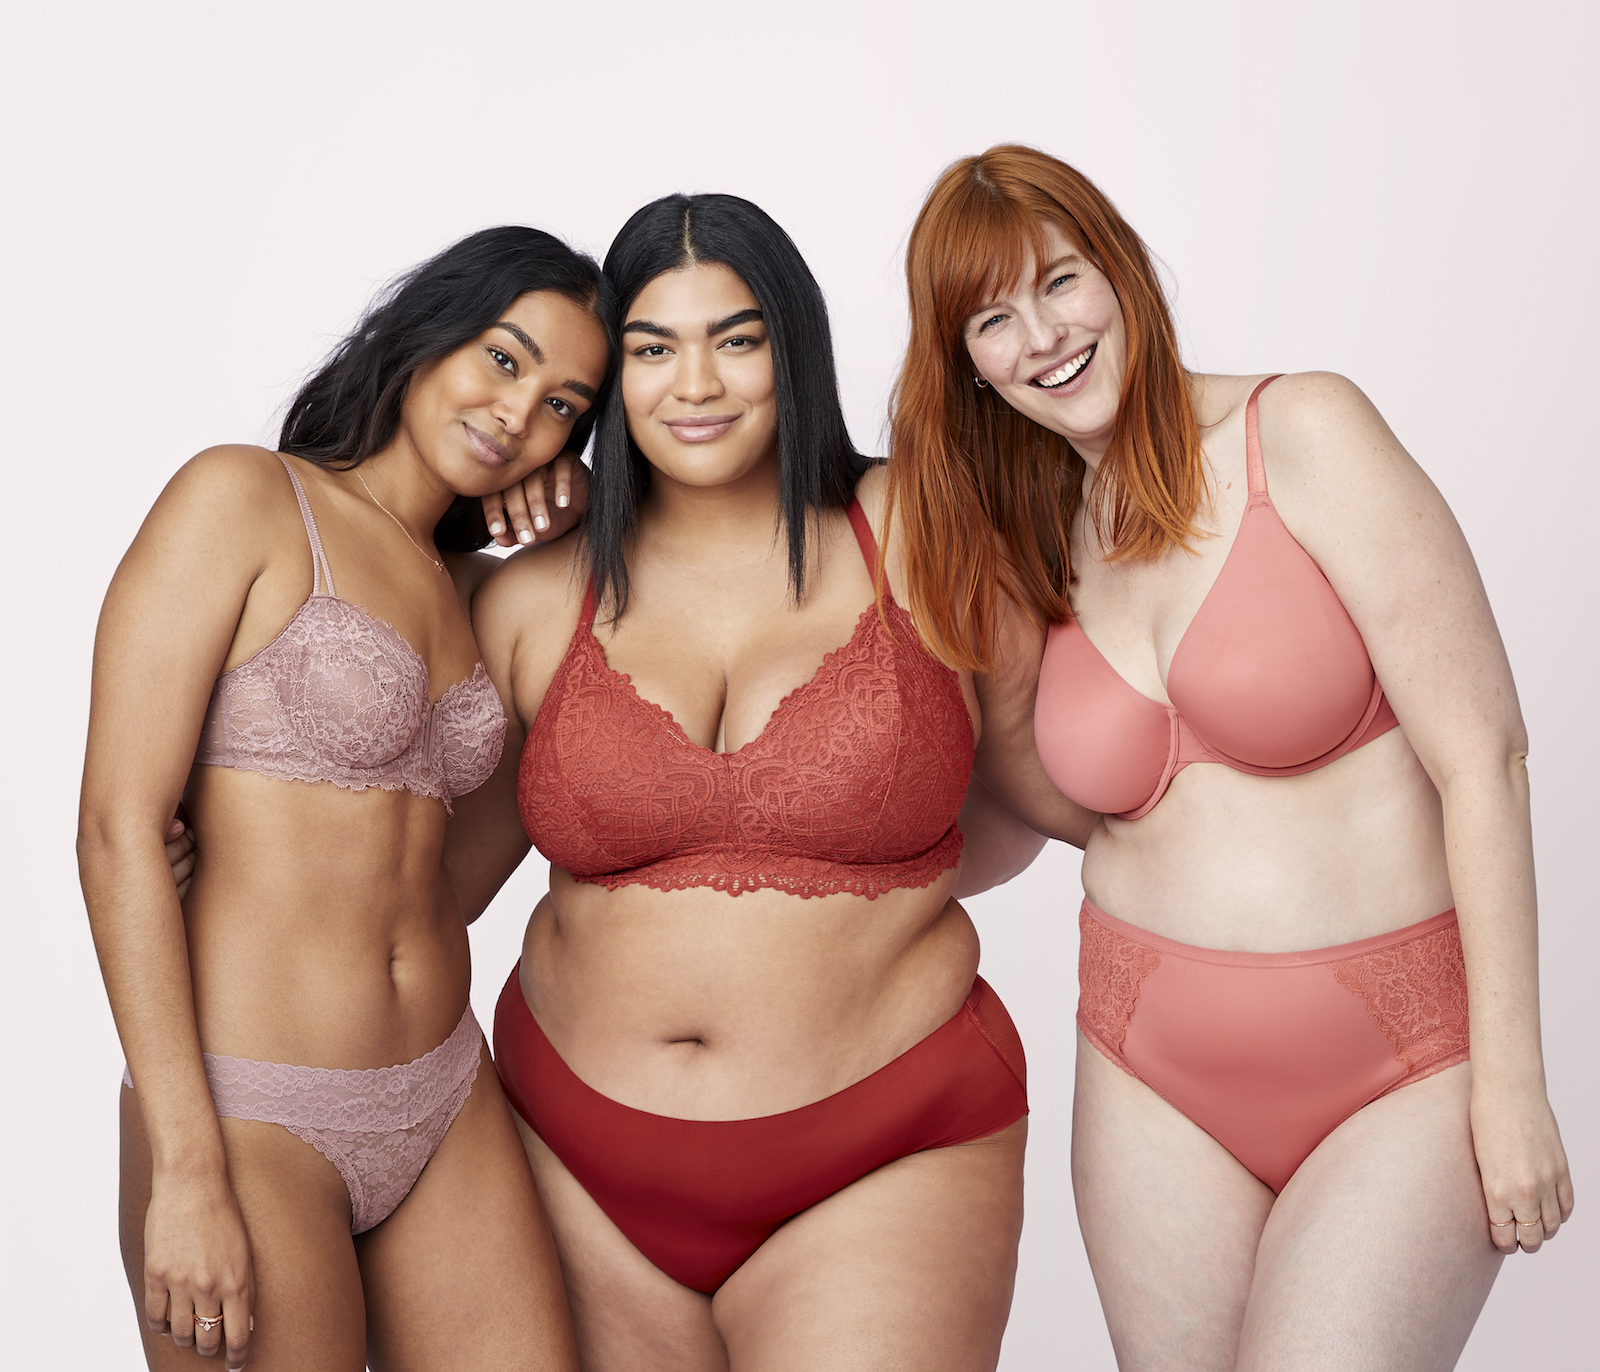 Target Is Expanding Its Line of Nude Lingerie